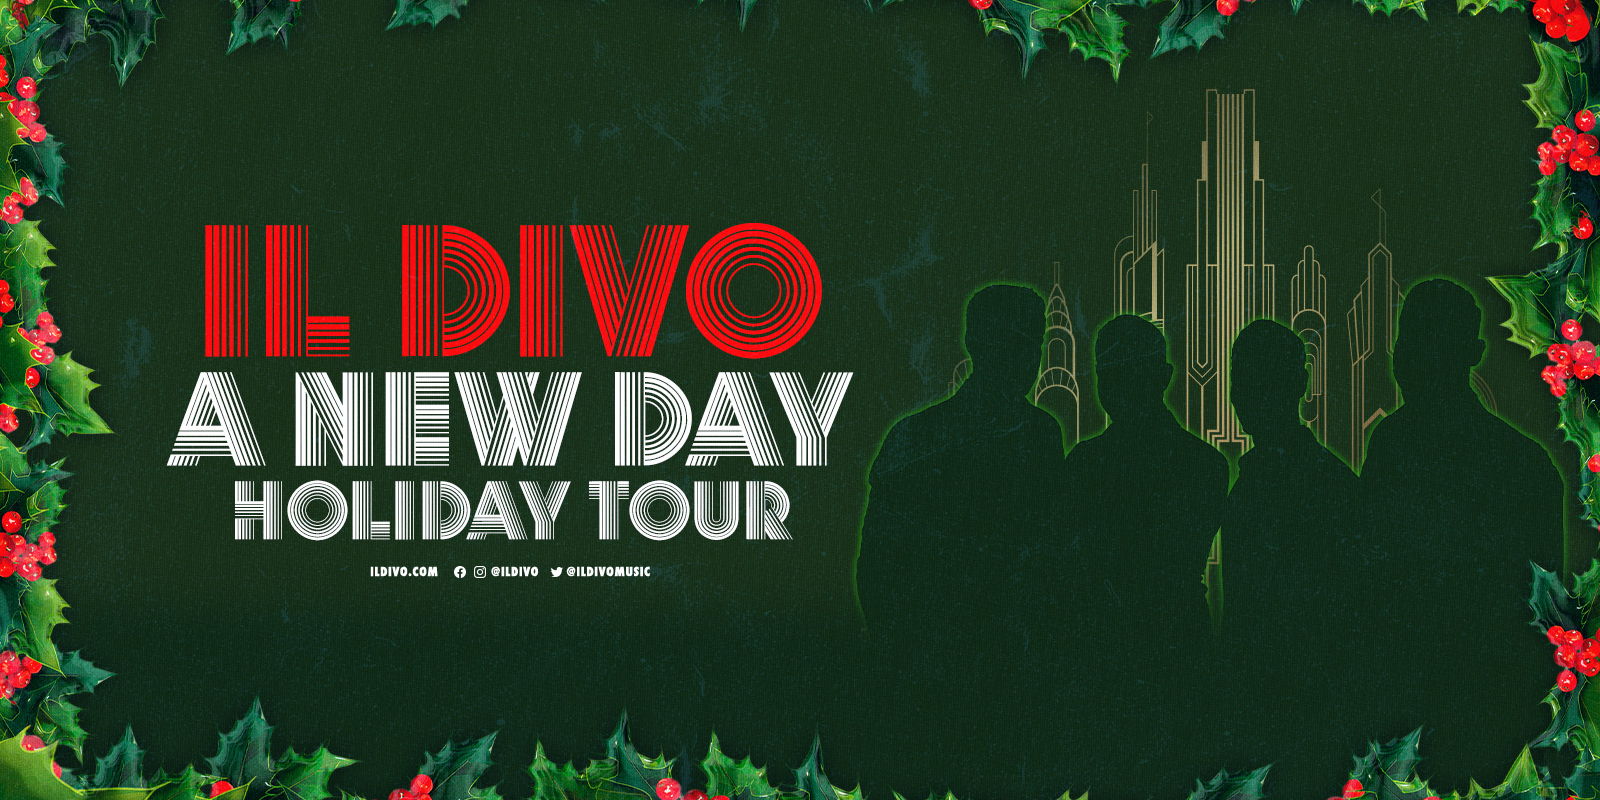 Il Divo - A New Holiday Tour promotional image